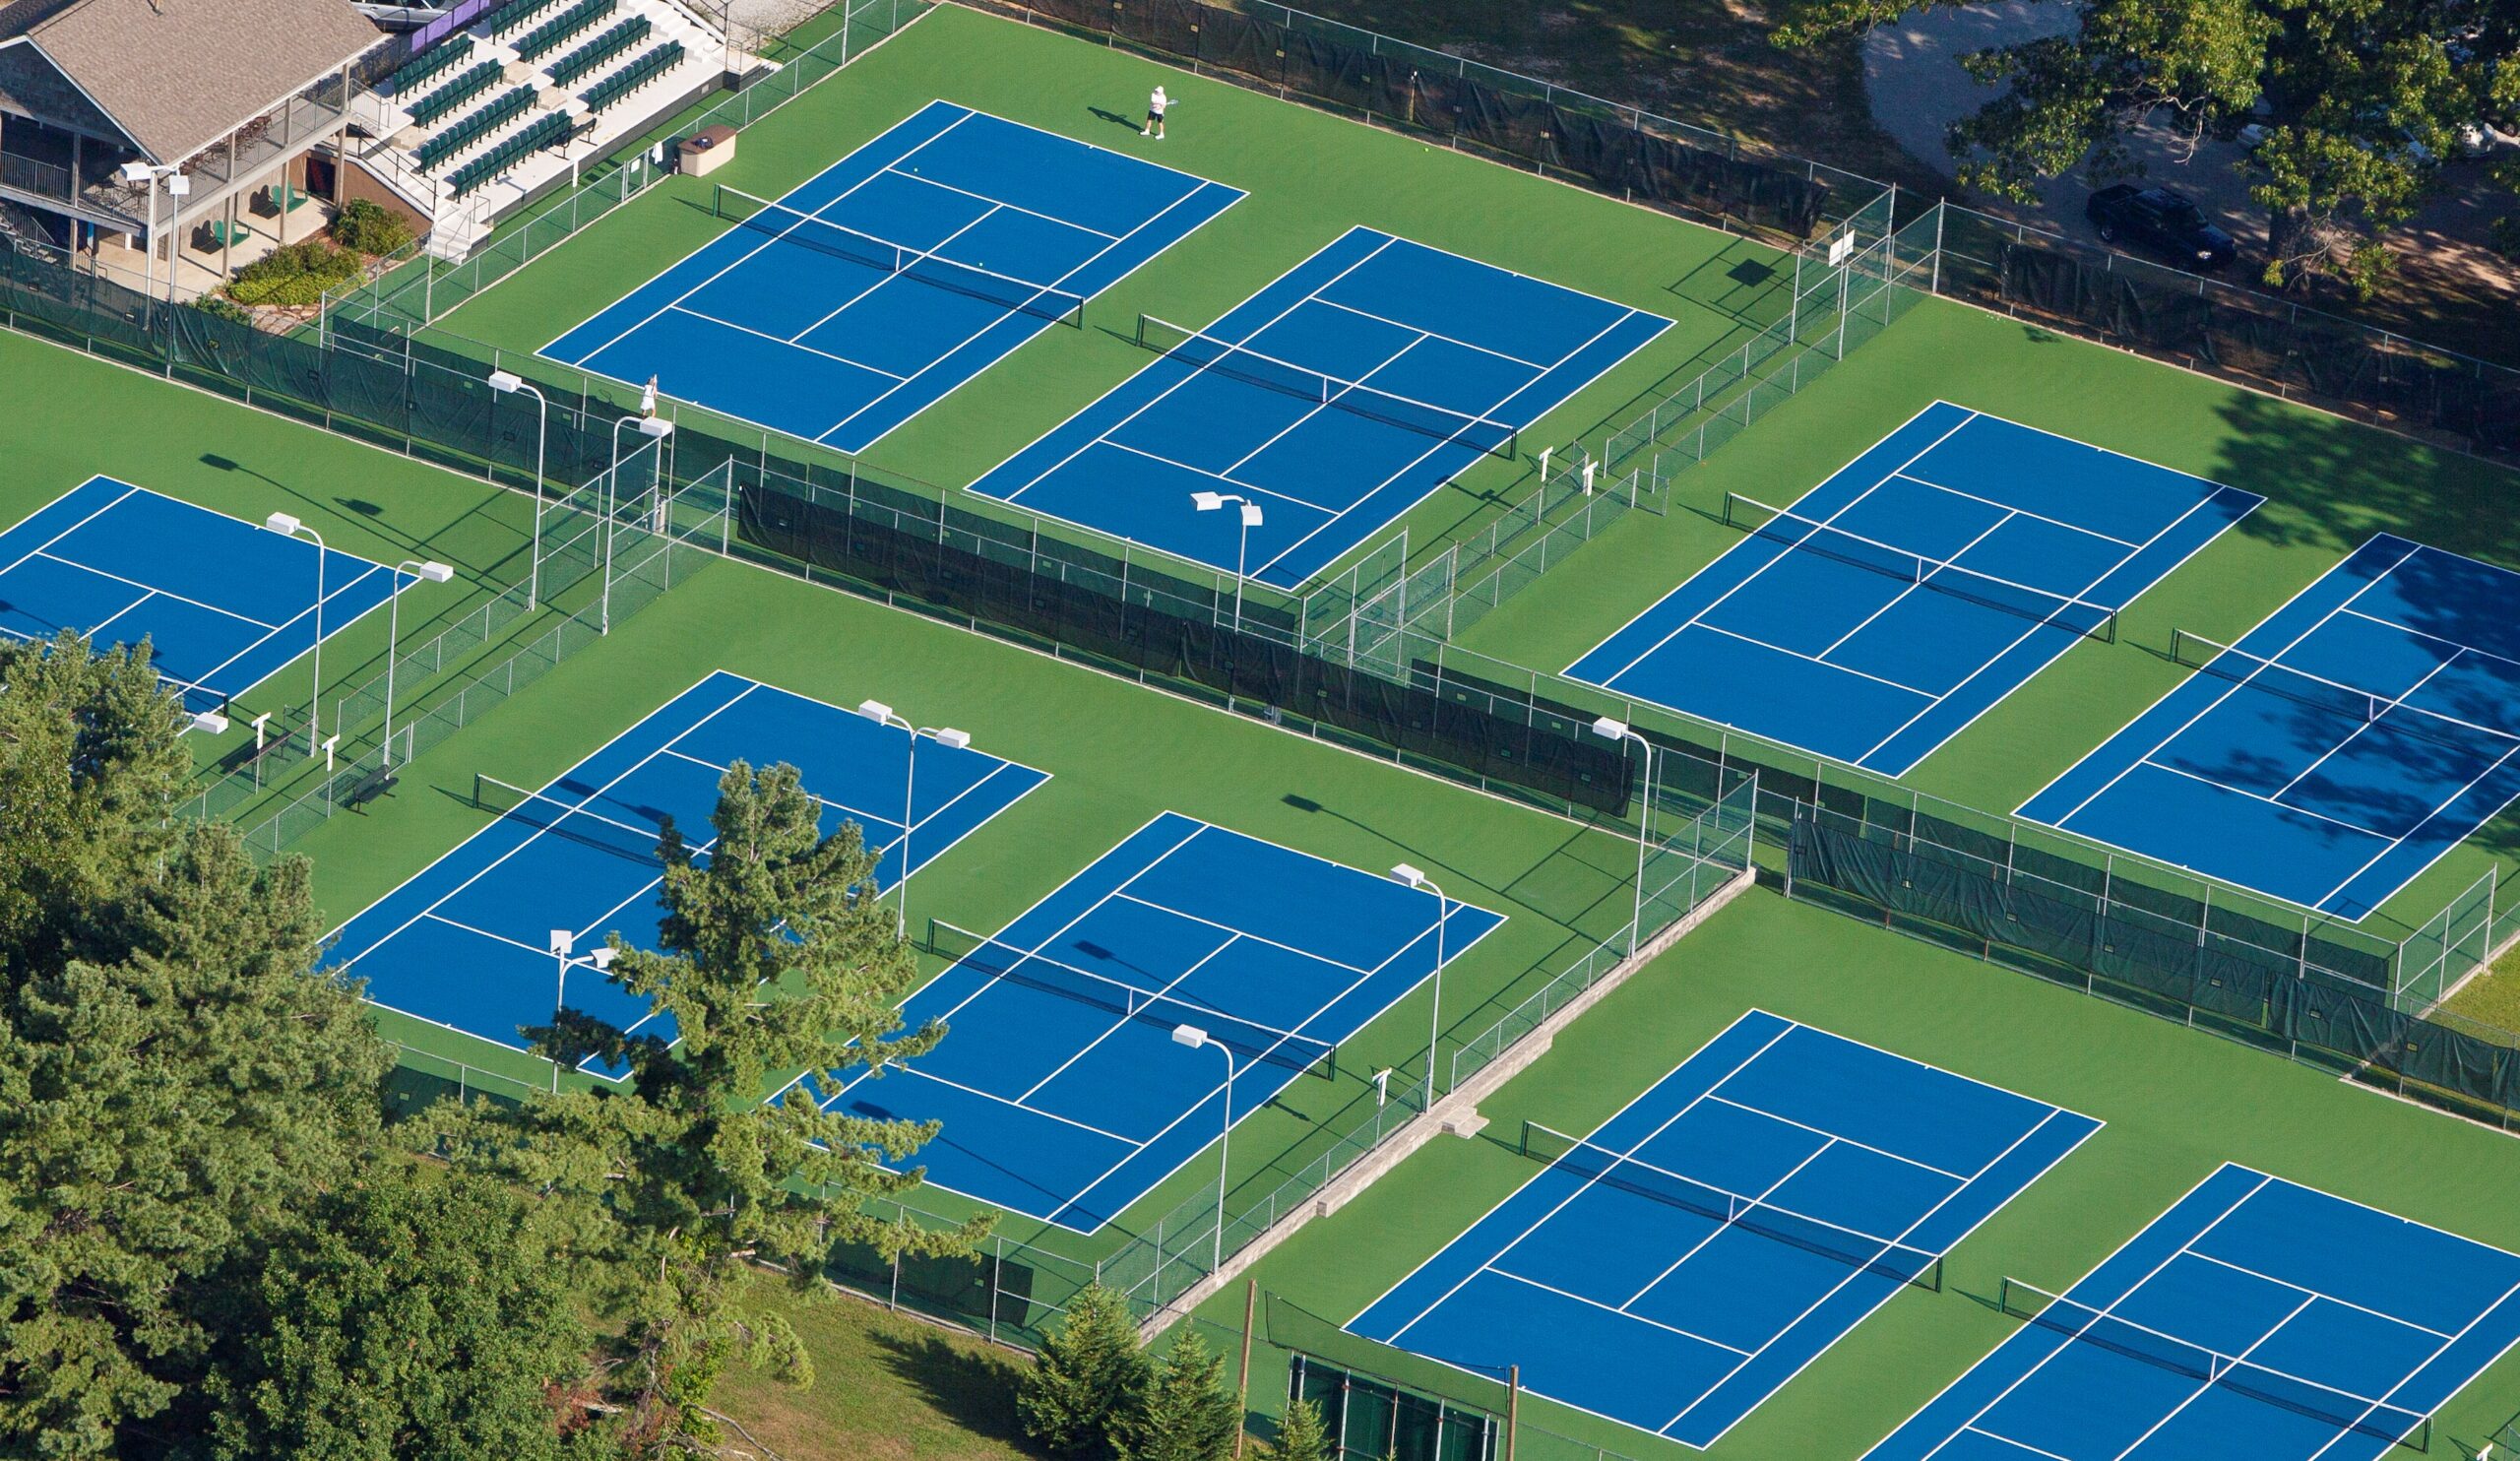 University of the South new tennis court surfaces